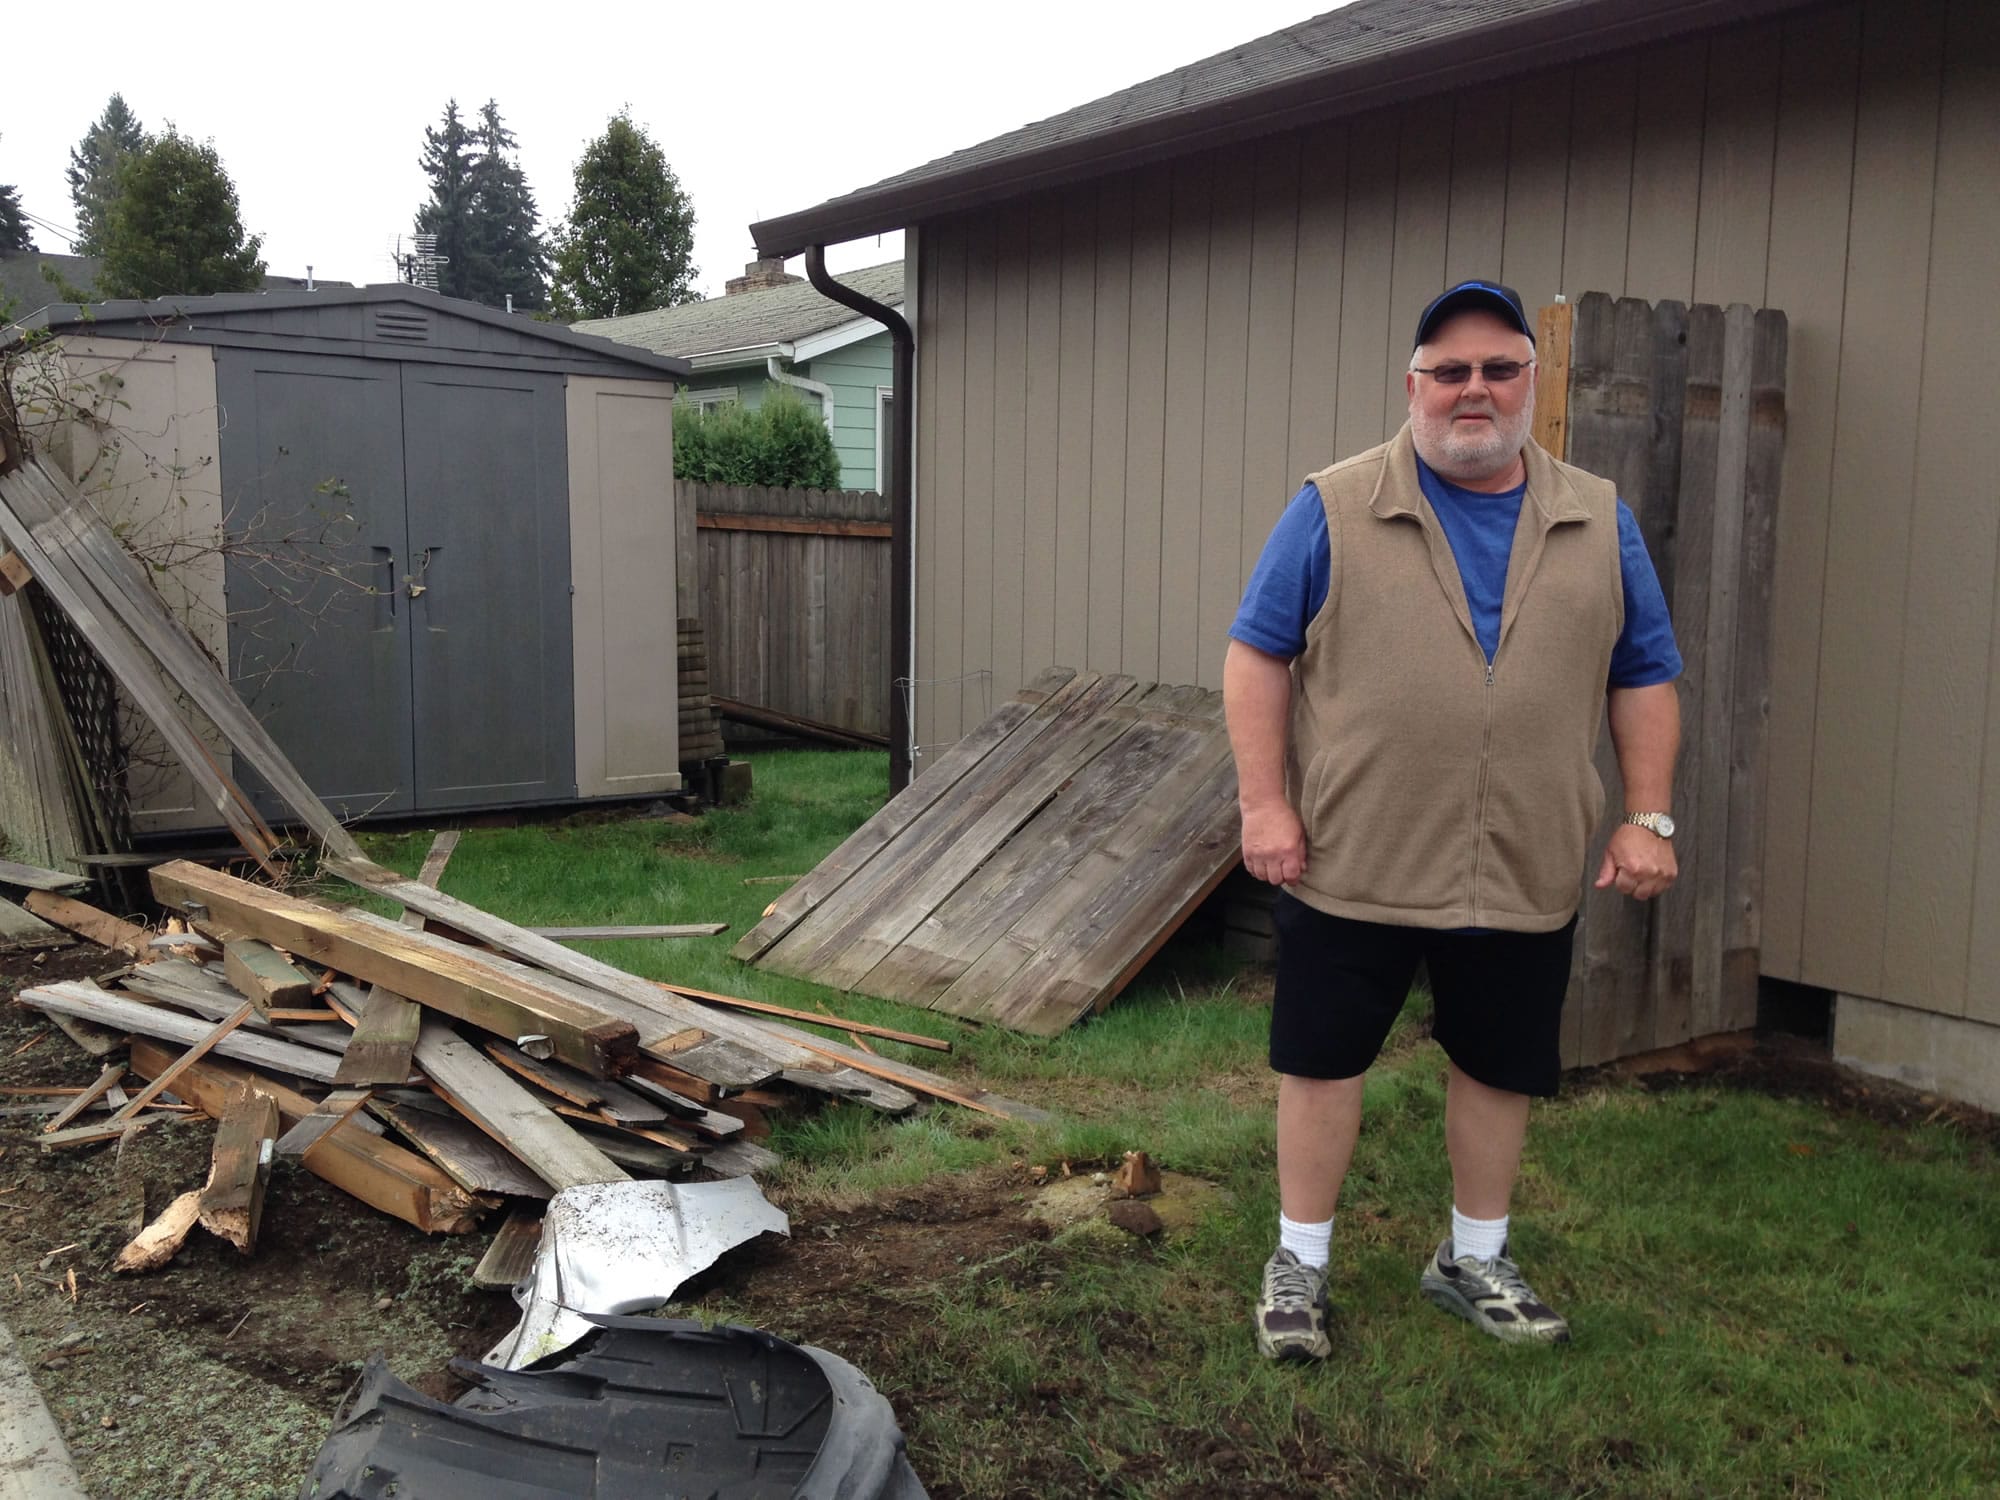 Jerry Sutherland stands next to the wreckage of his fence. A car sped through the roundabout at N.E. 32nd Circle on Thursday night and damaged a concrete-moored metal post and fence at his home.